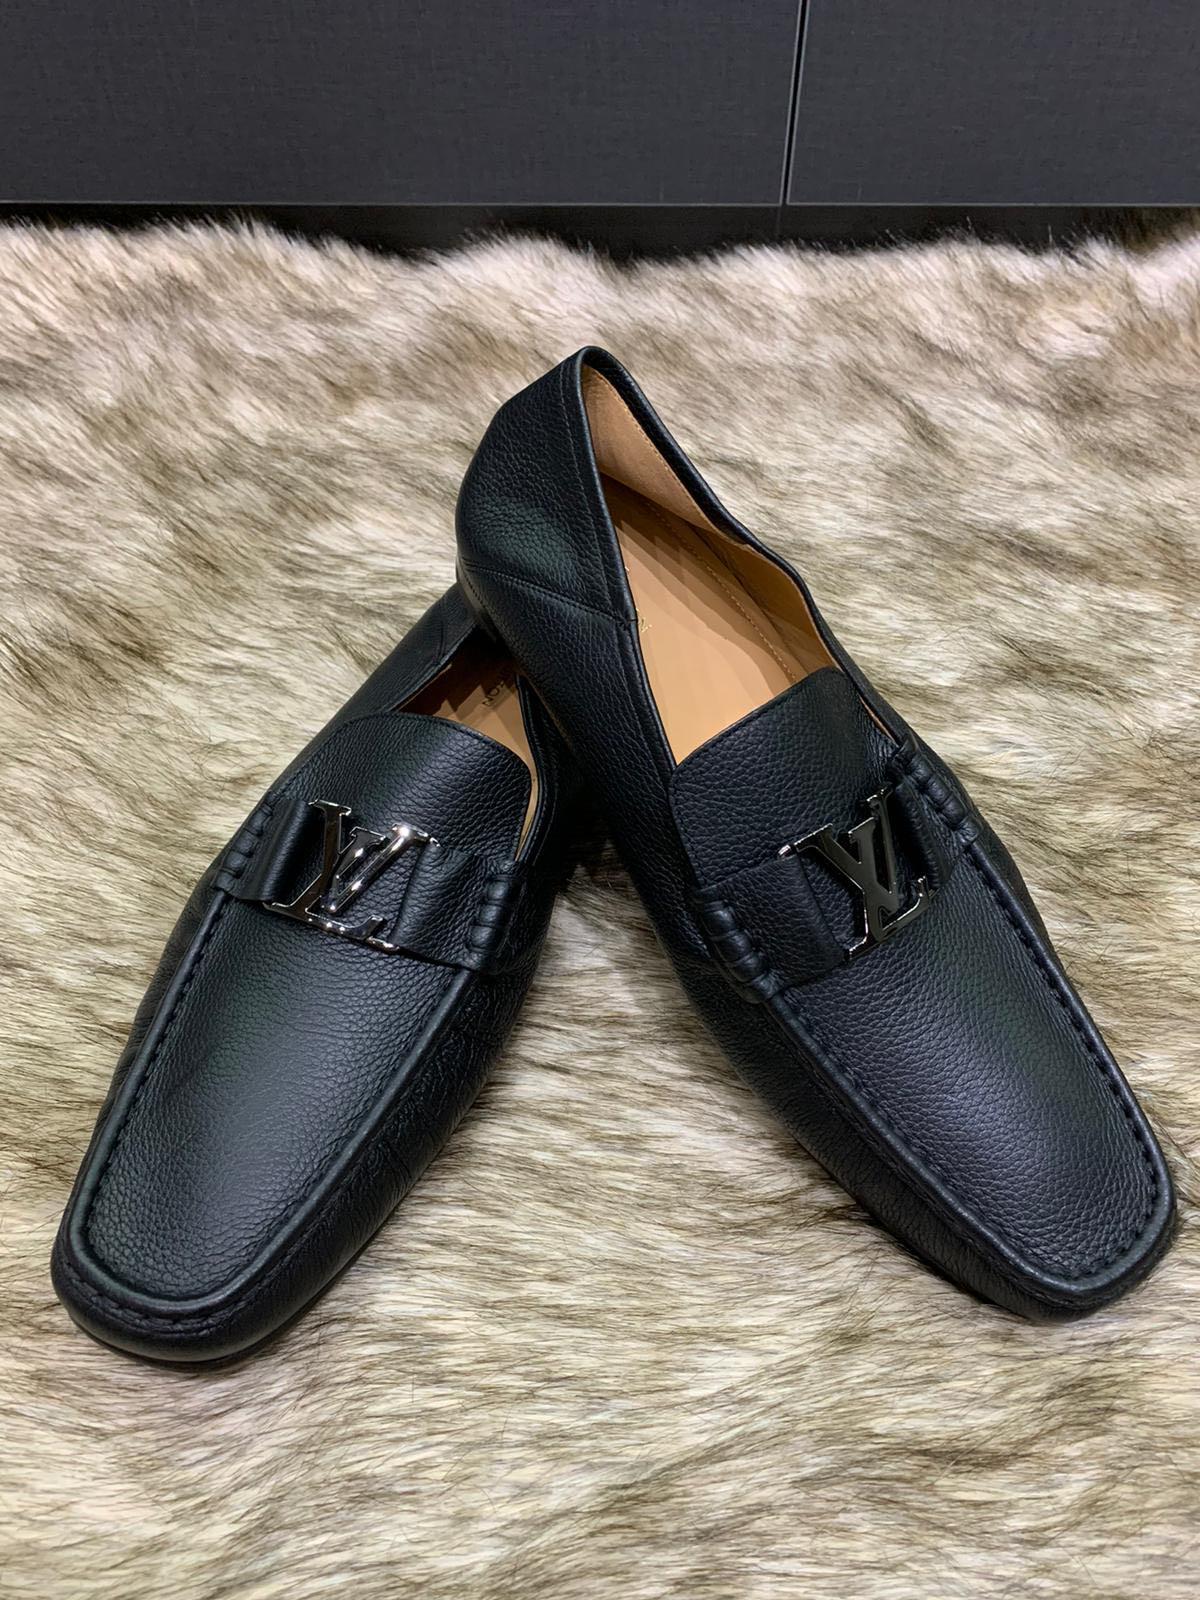 Louis Vuitton Major Loafer BROWN. Size 08.0